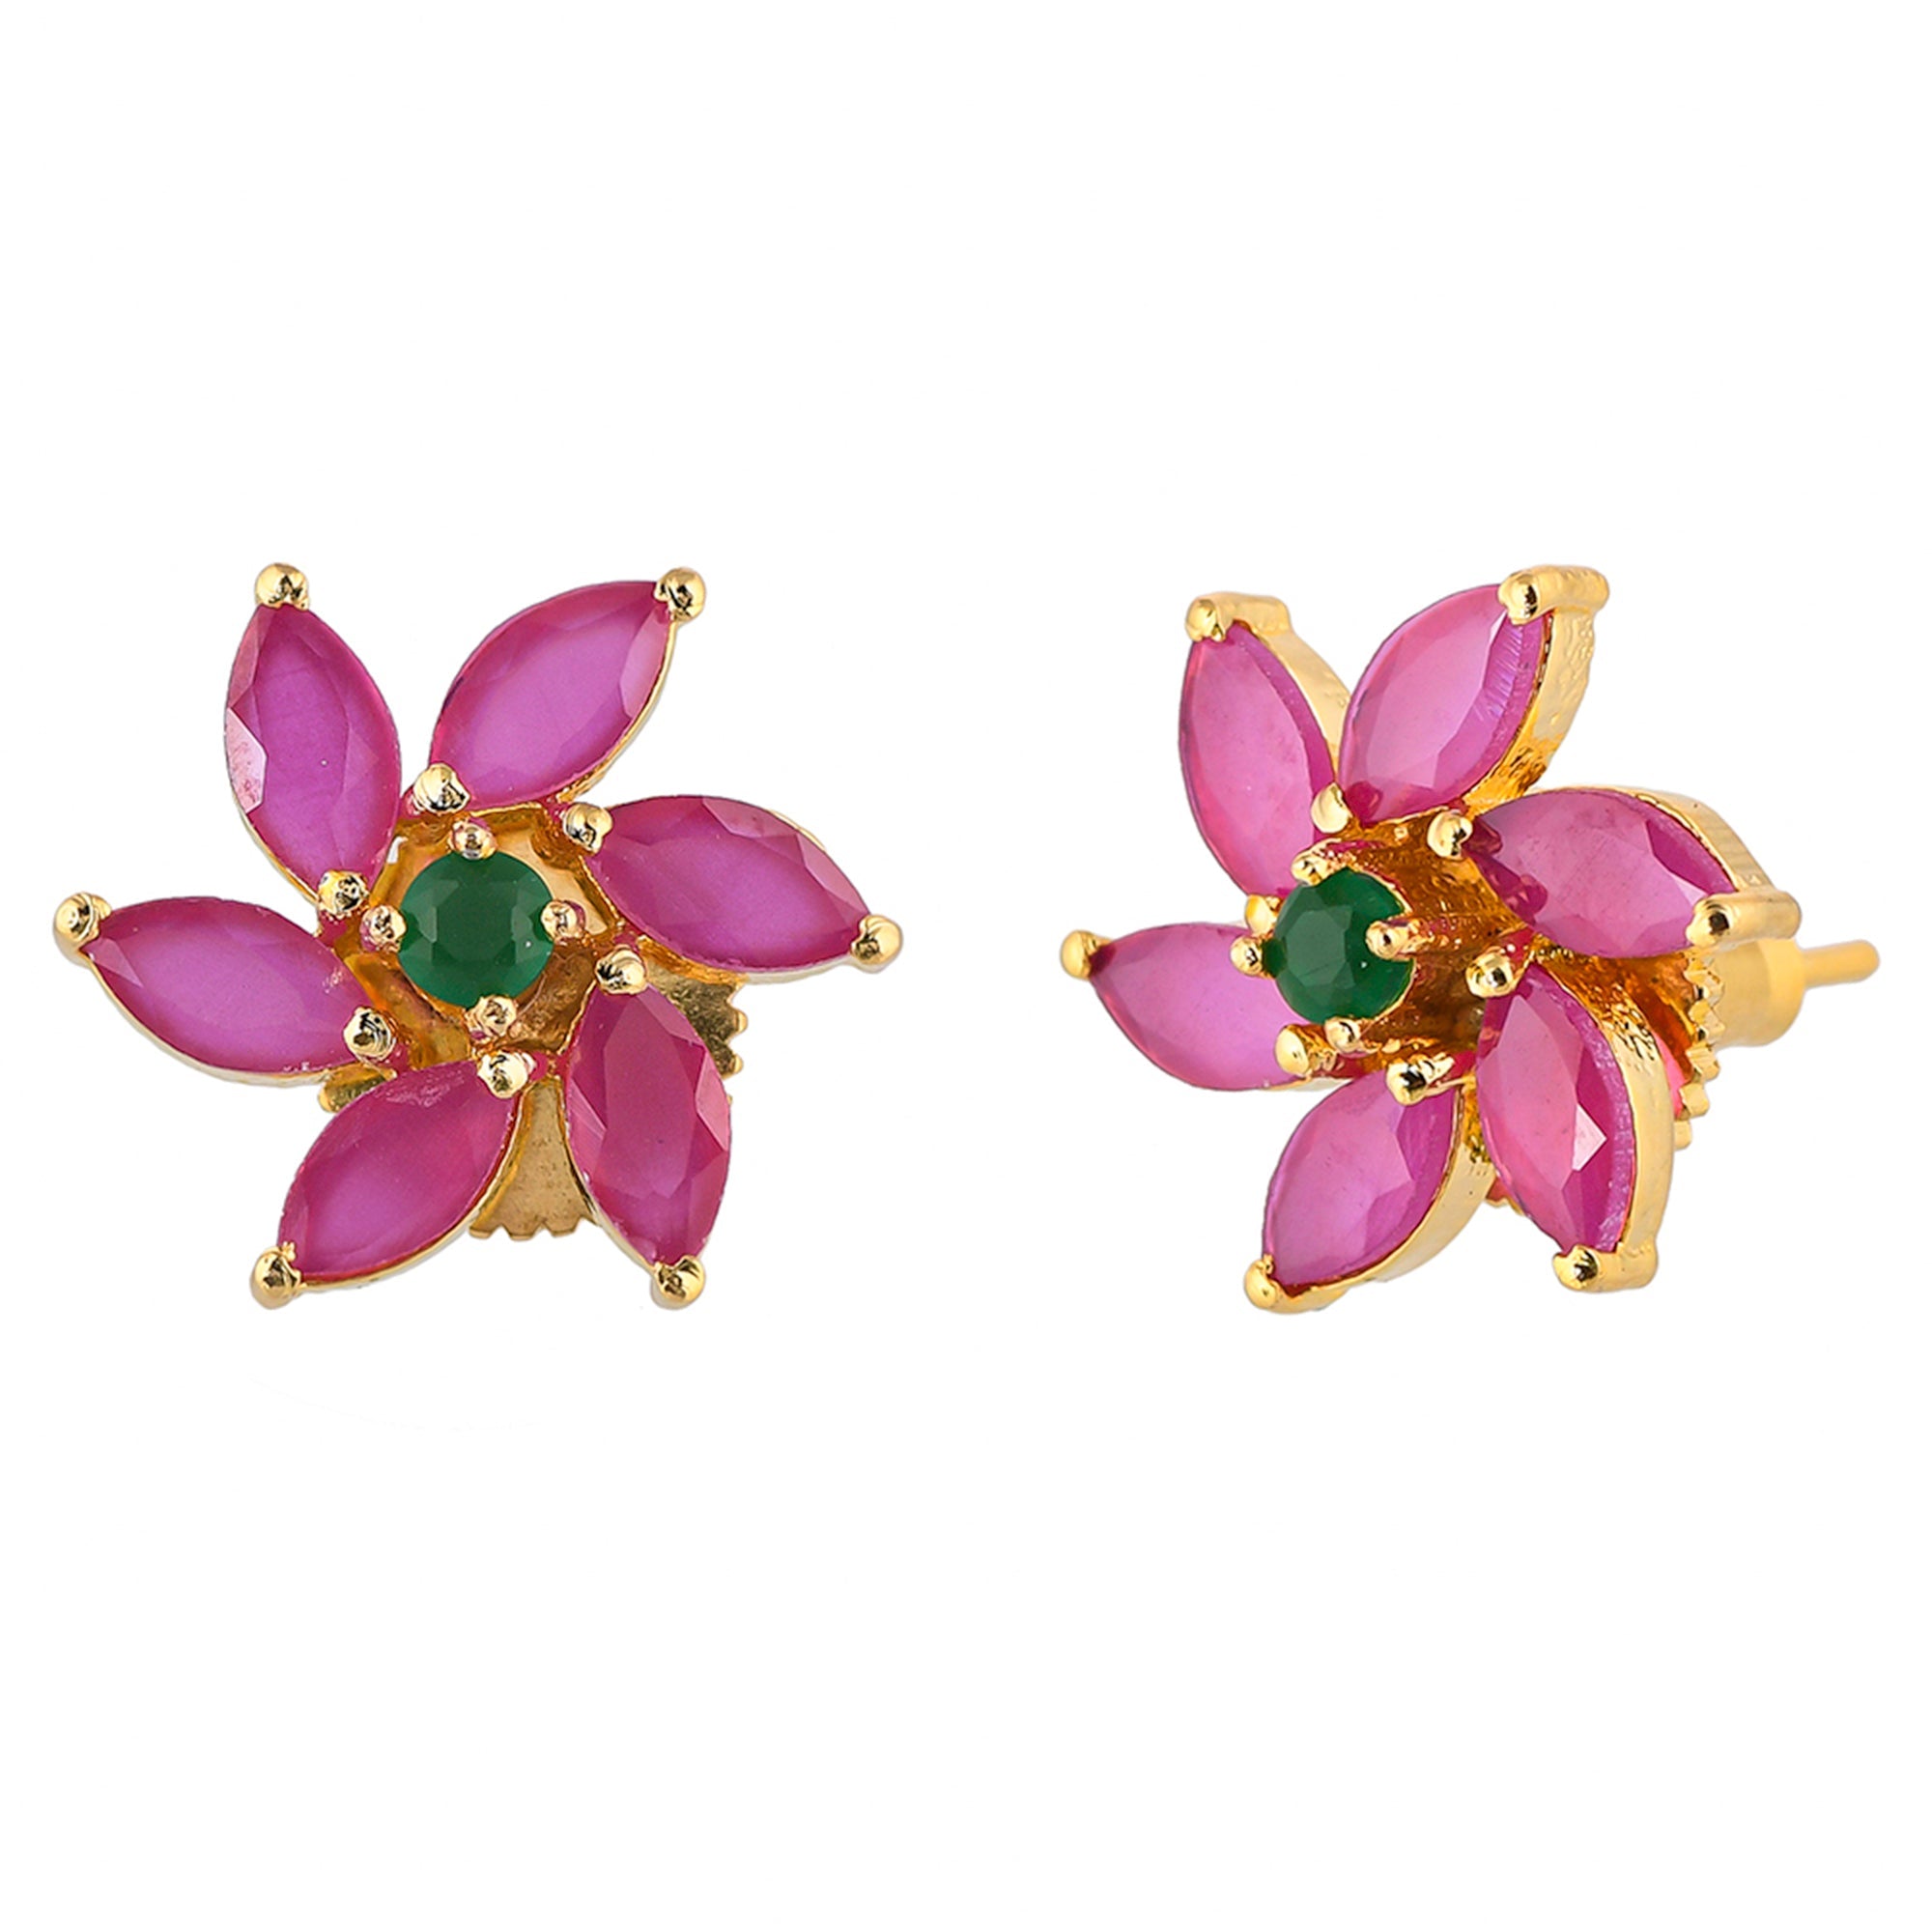 Women's Marquise Cut Pink And Green Cz Floral Motif Stud Earrings - Voylla